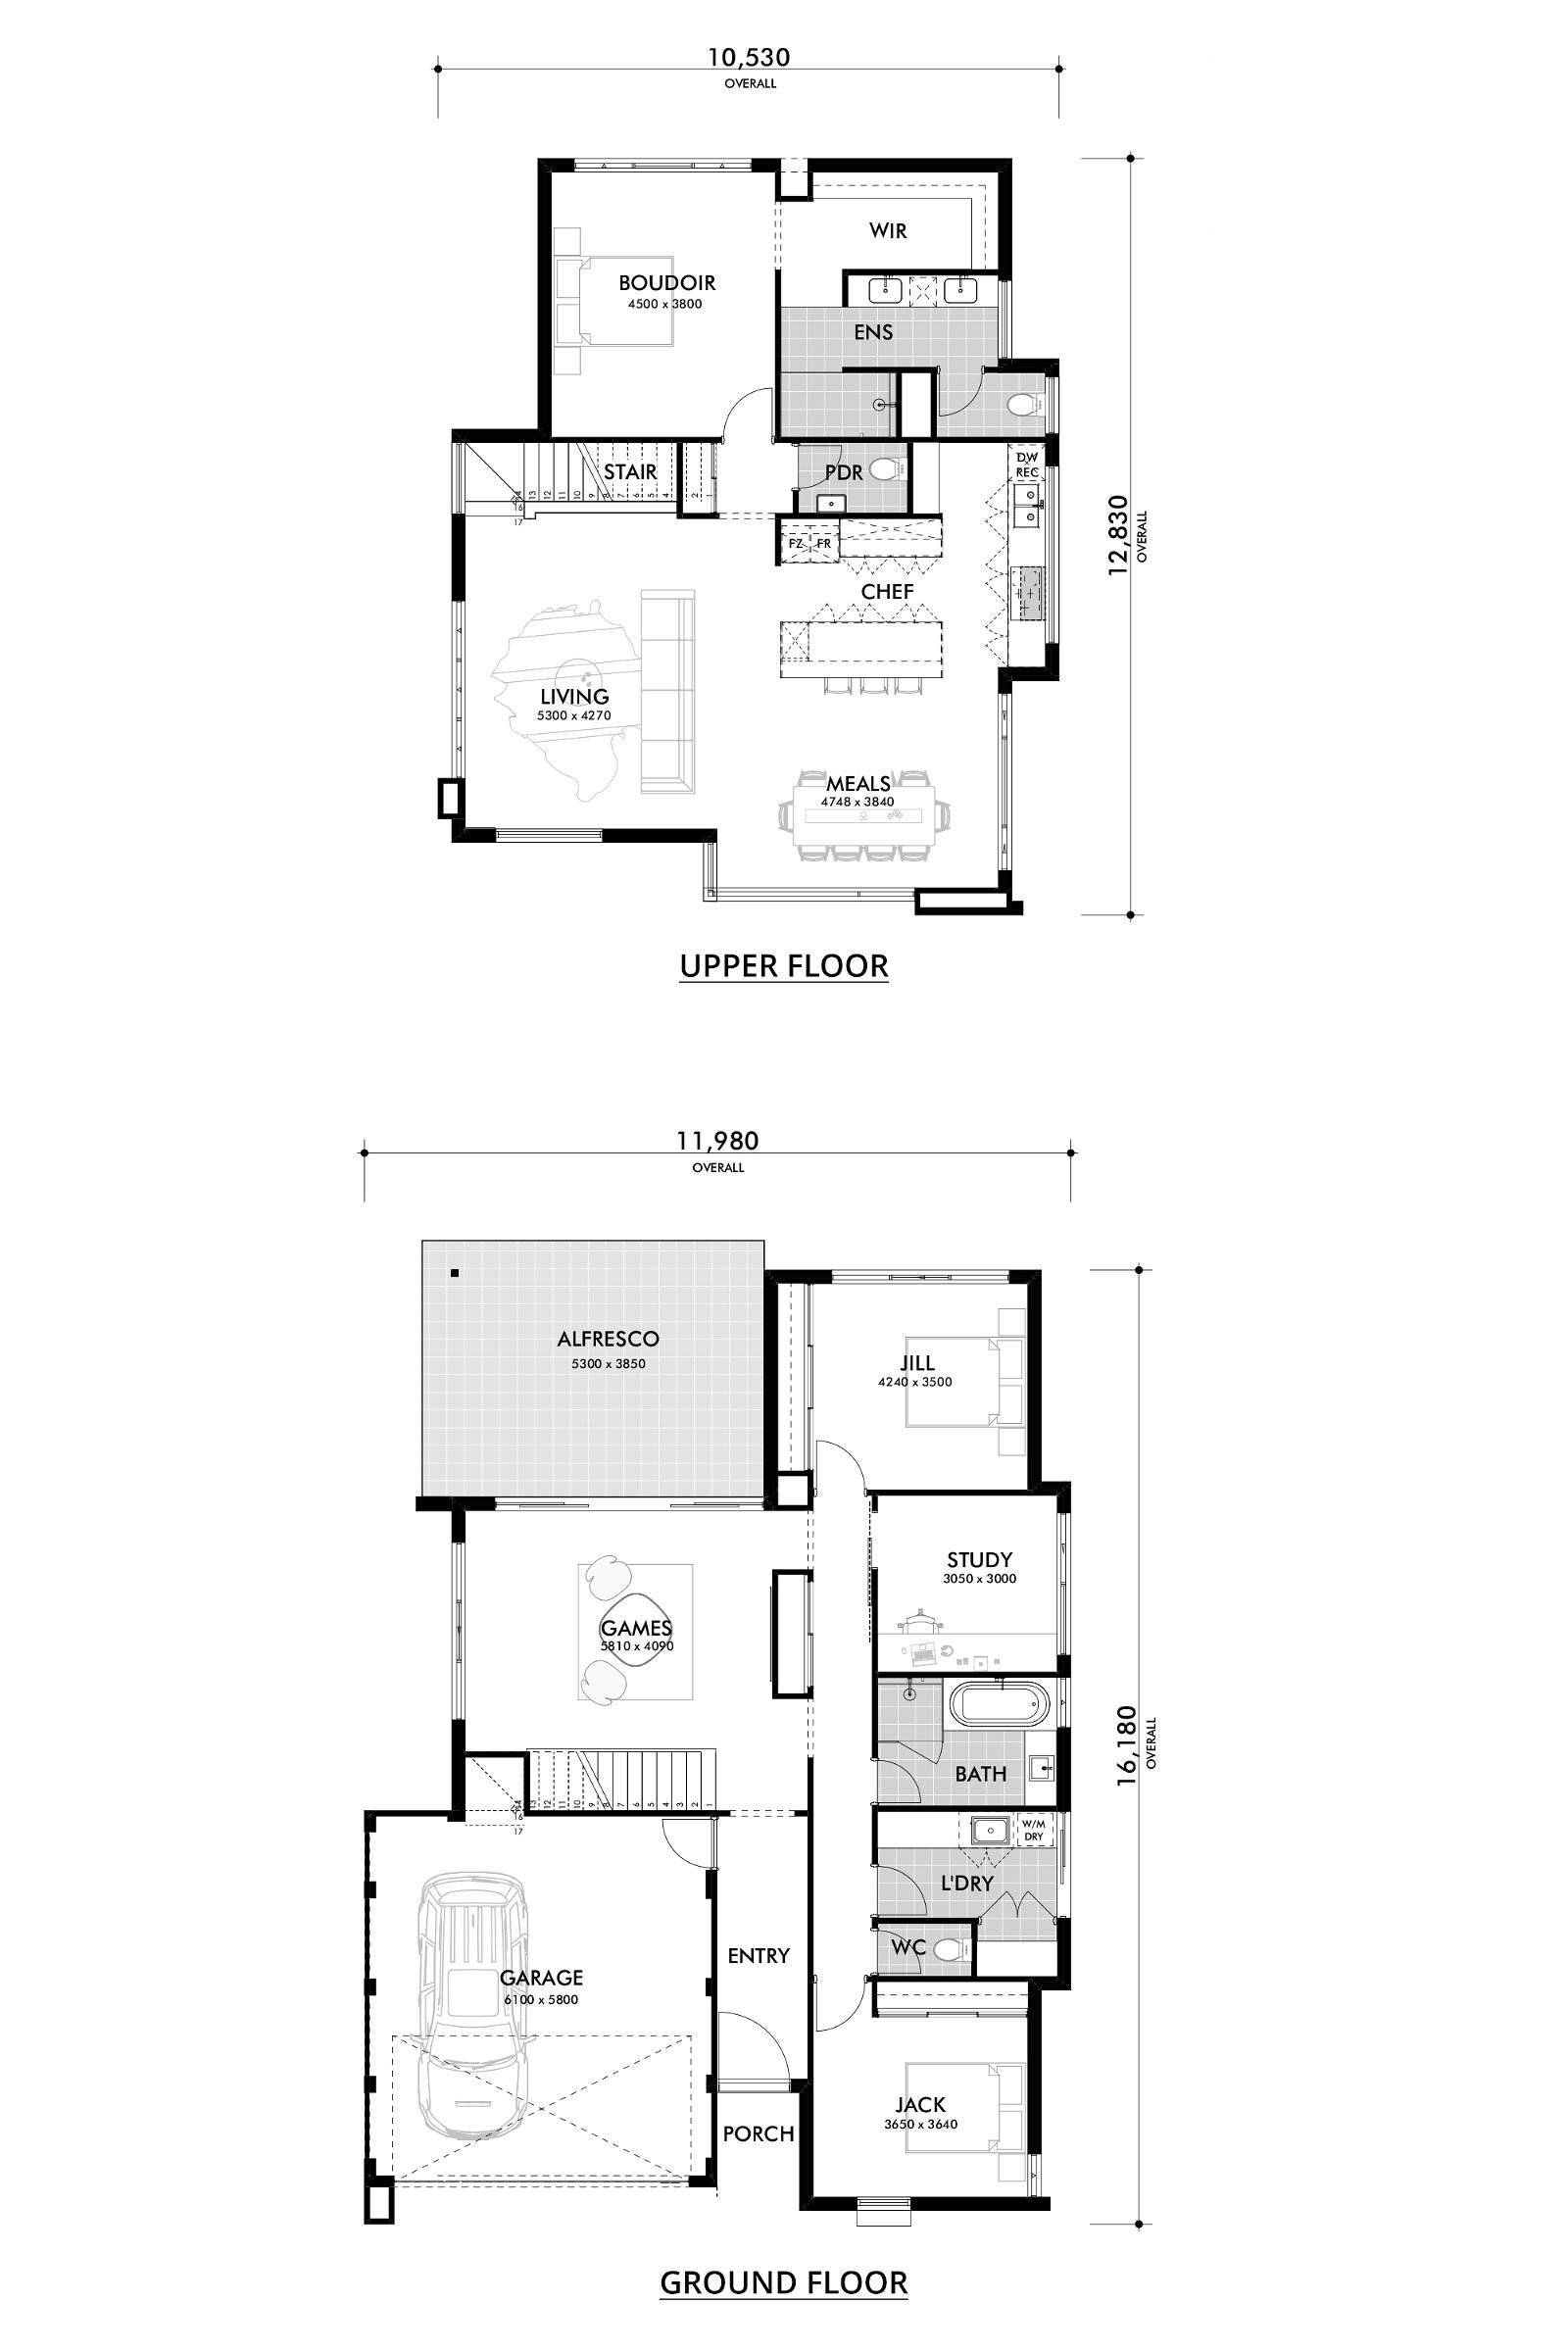 Residential Attitudes - The Upside Down - Floorplan - The Upside Down Floorplan Website